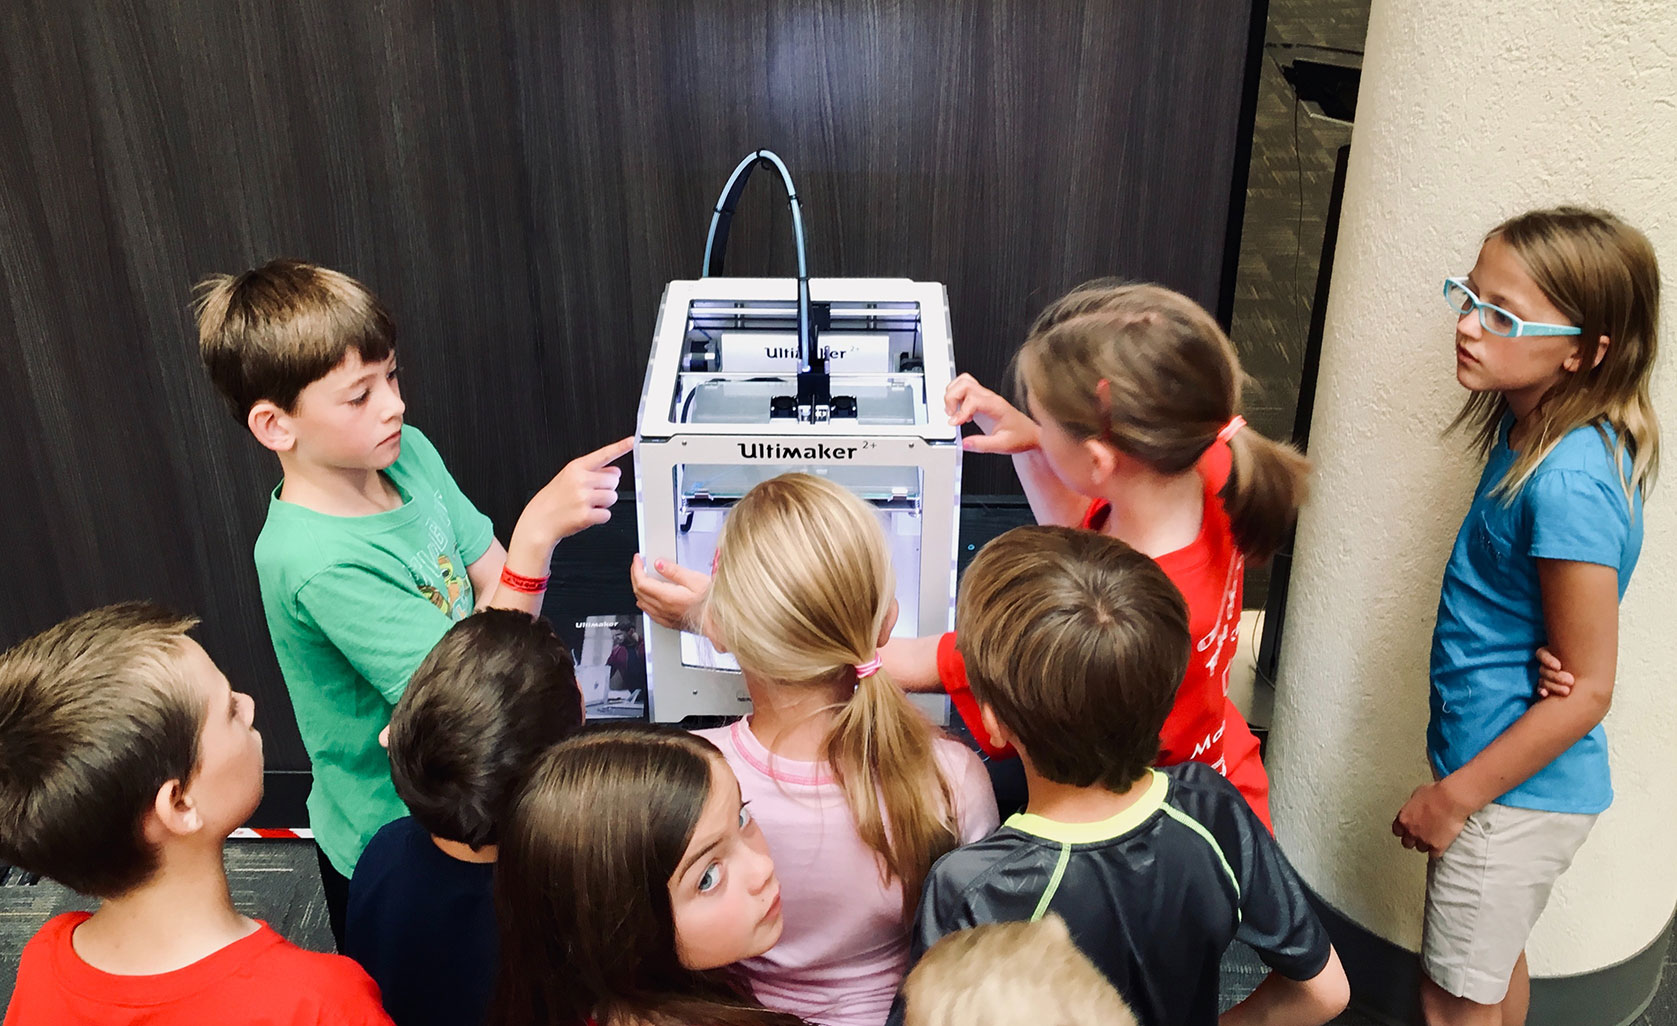 kids gathered around and interested at a 3d printer